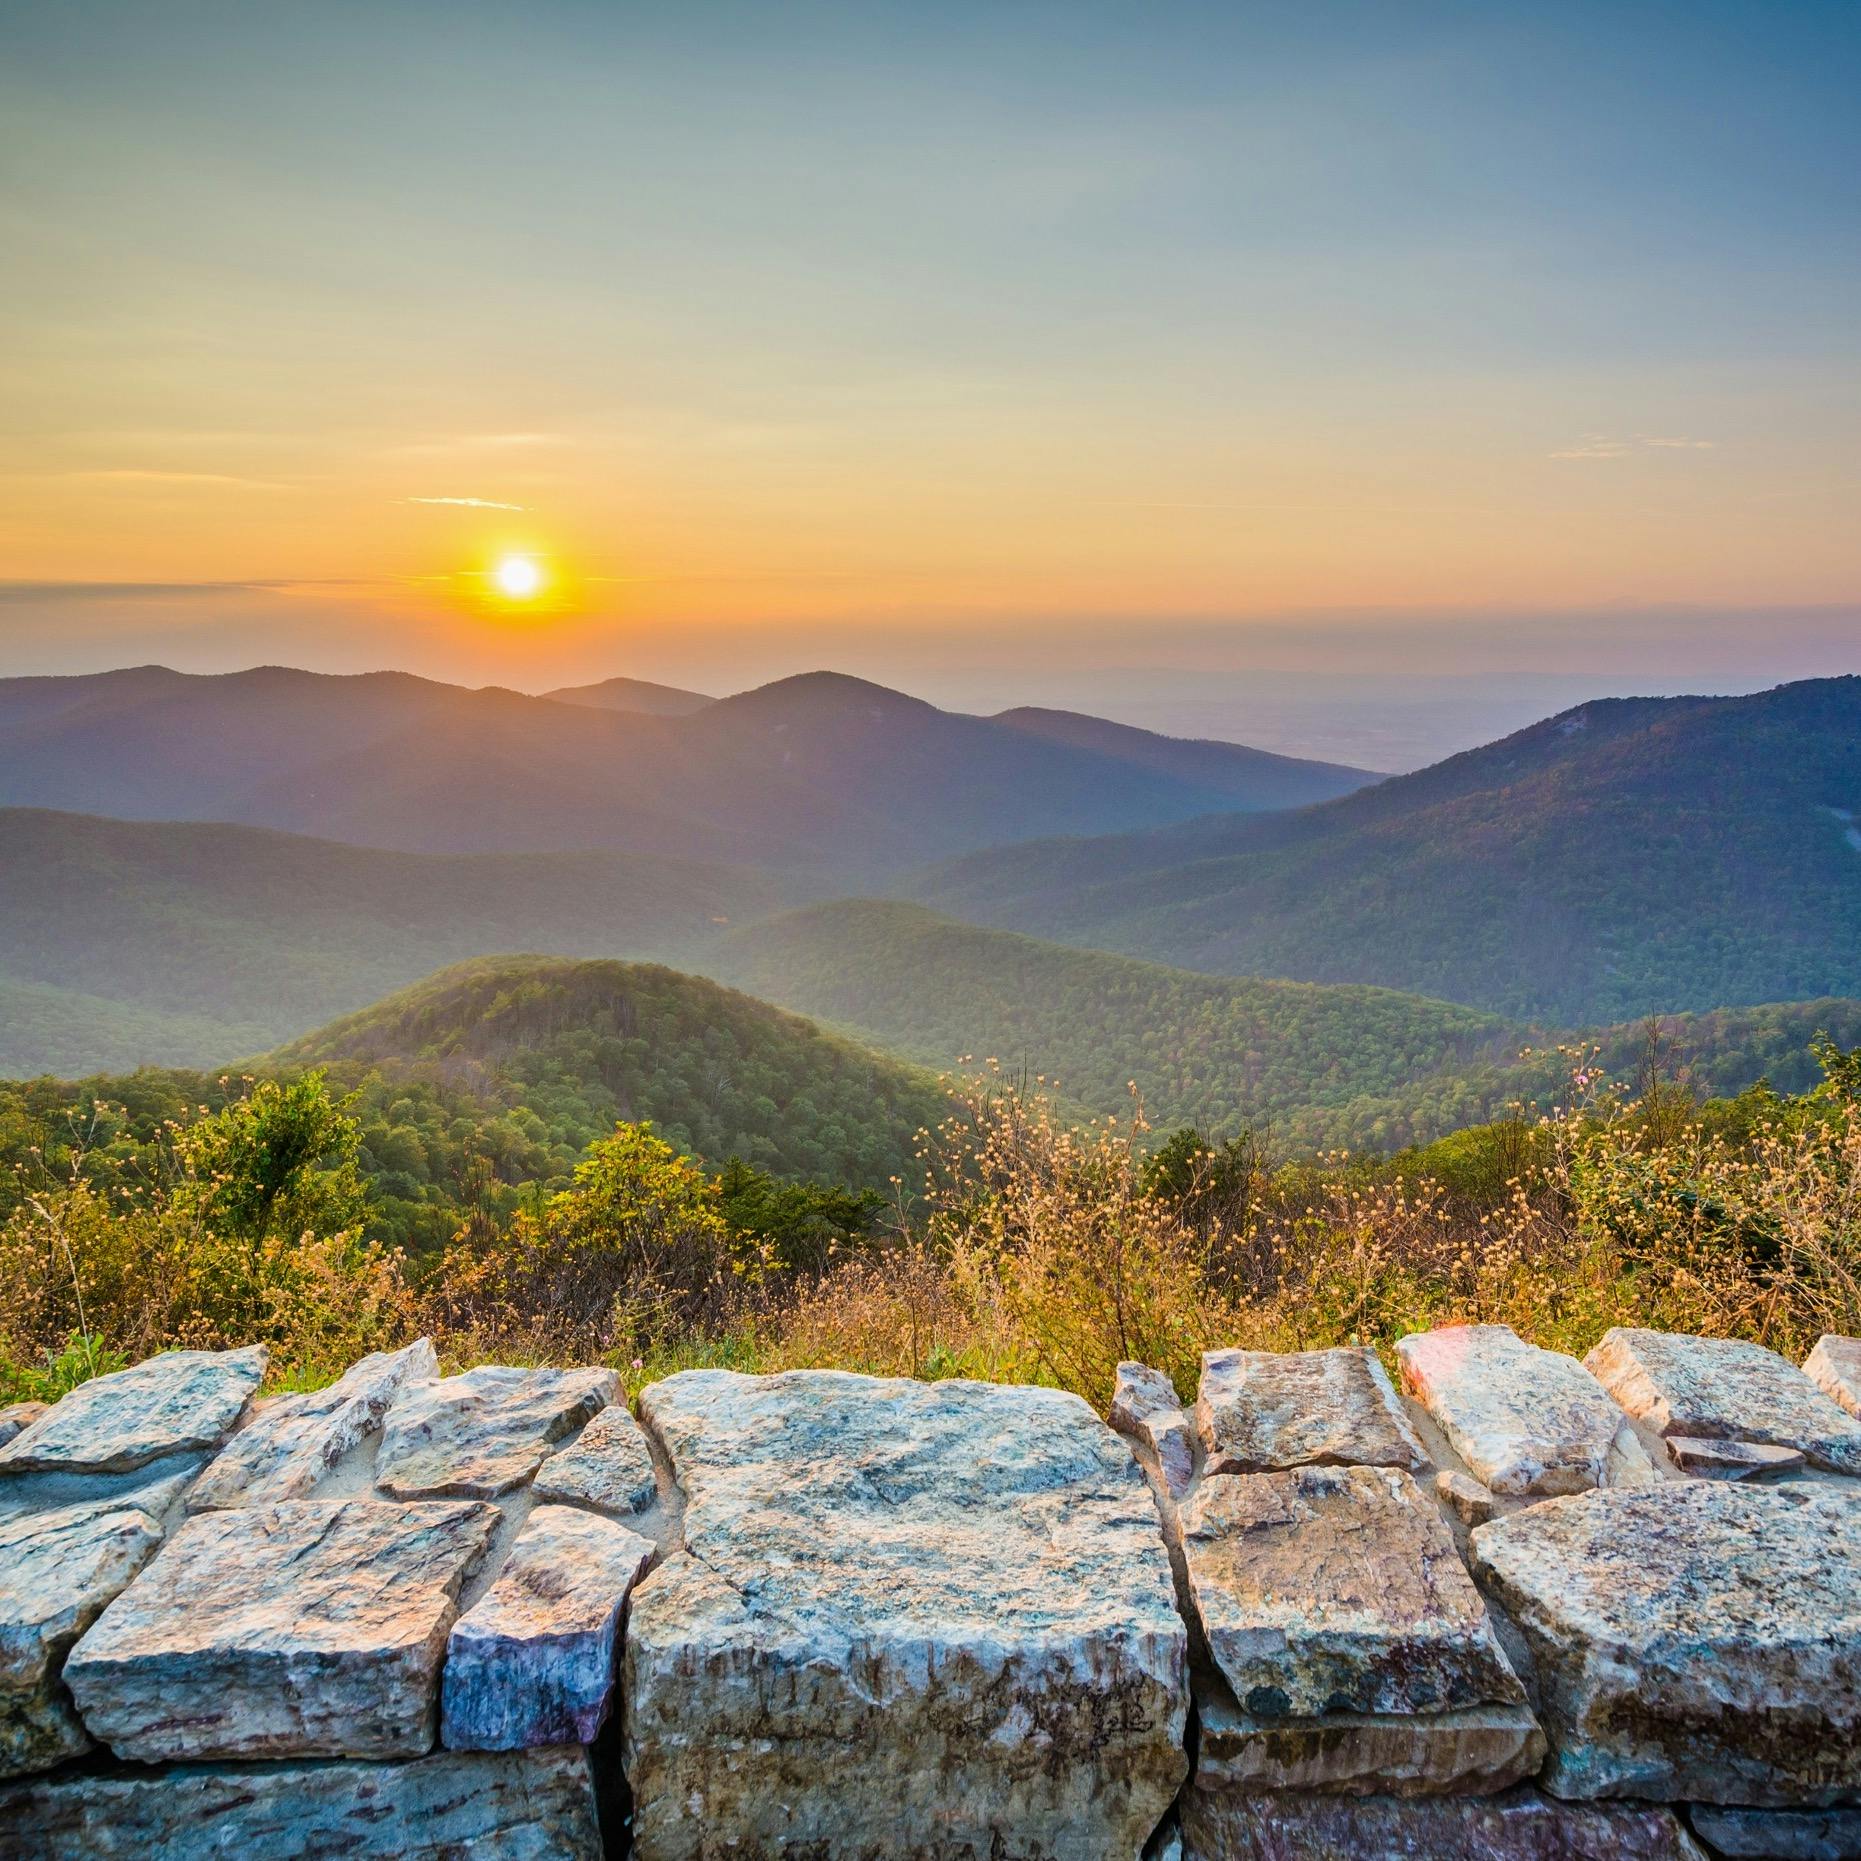 #106: Mailbag! Shenandoah NP in a Weekend, and More